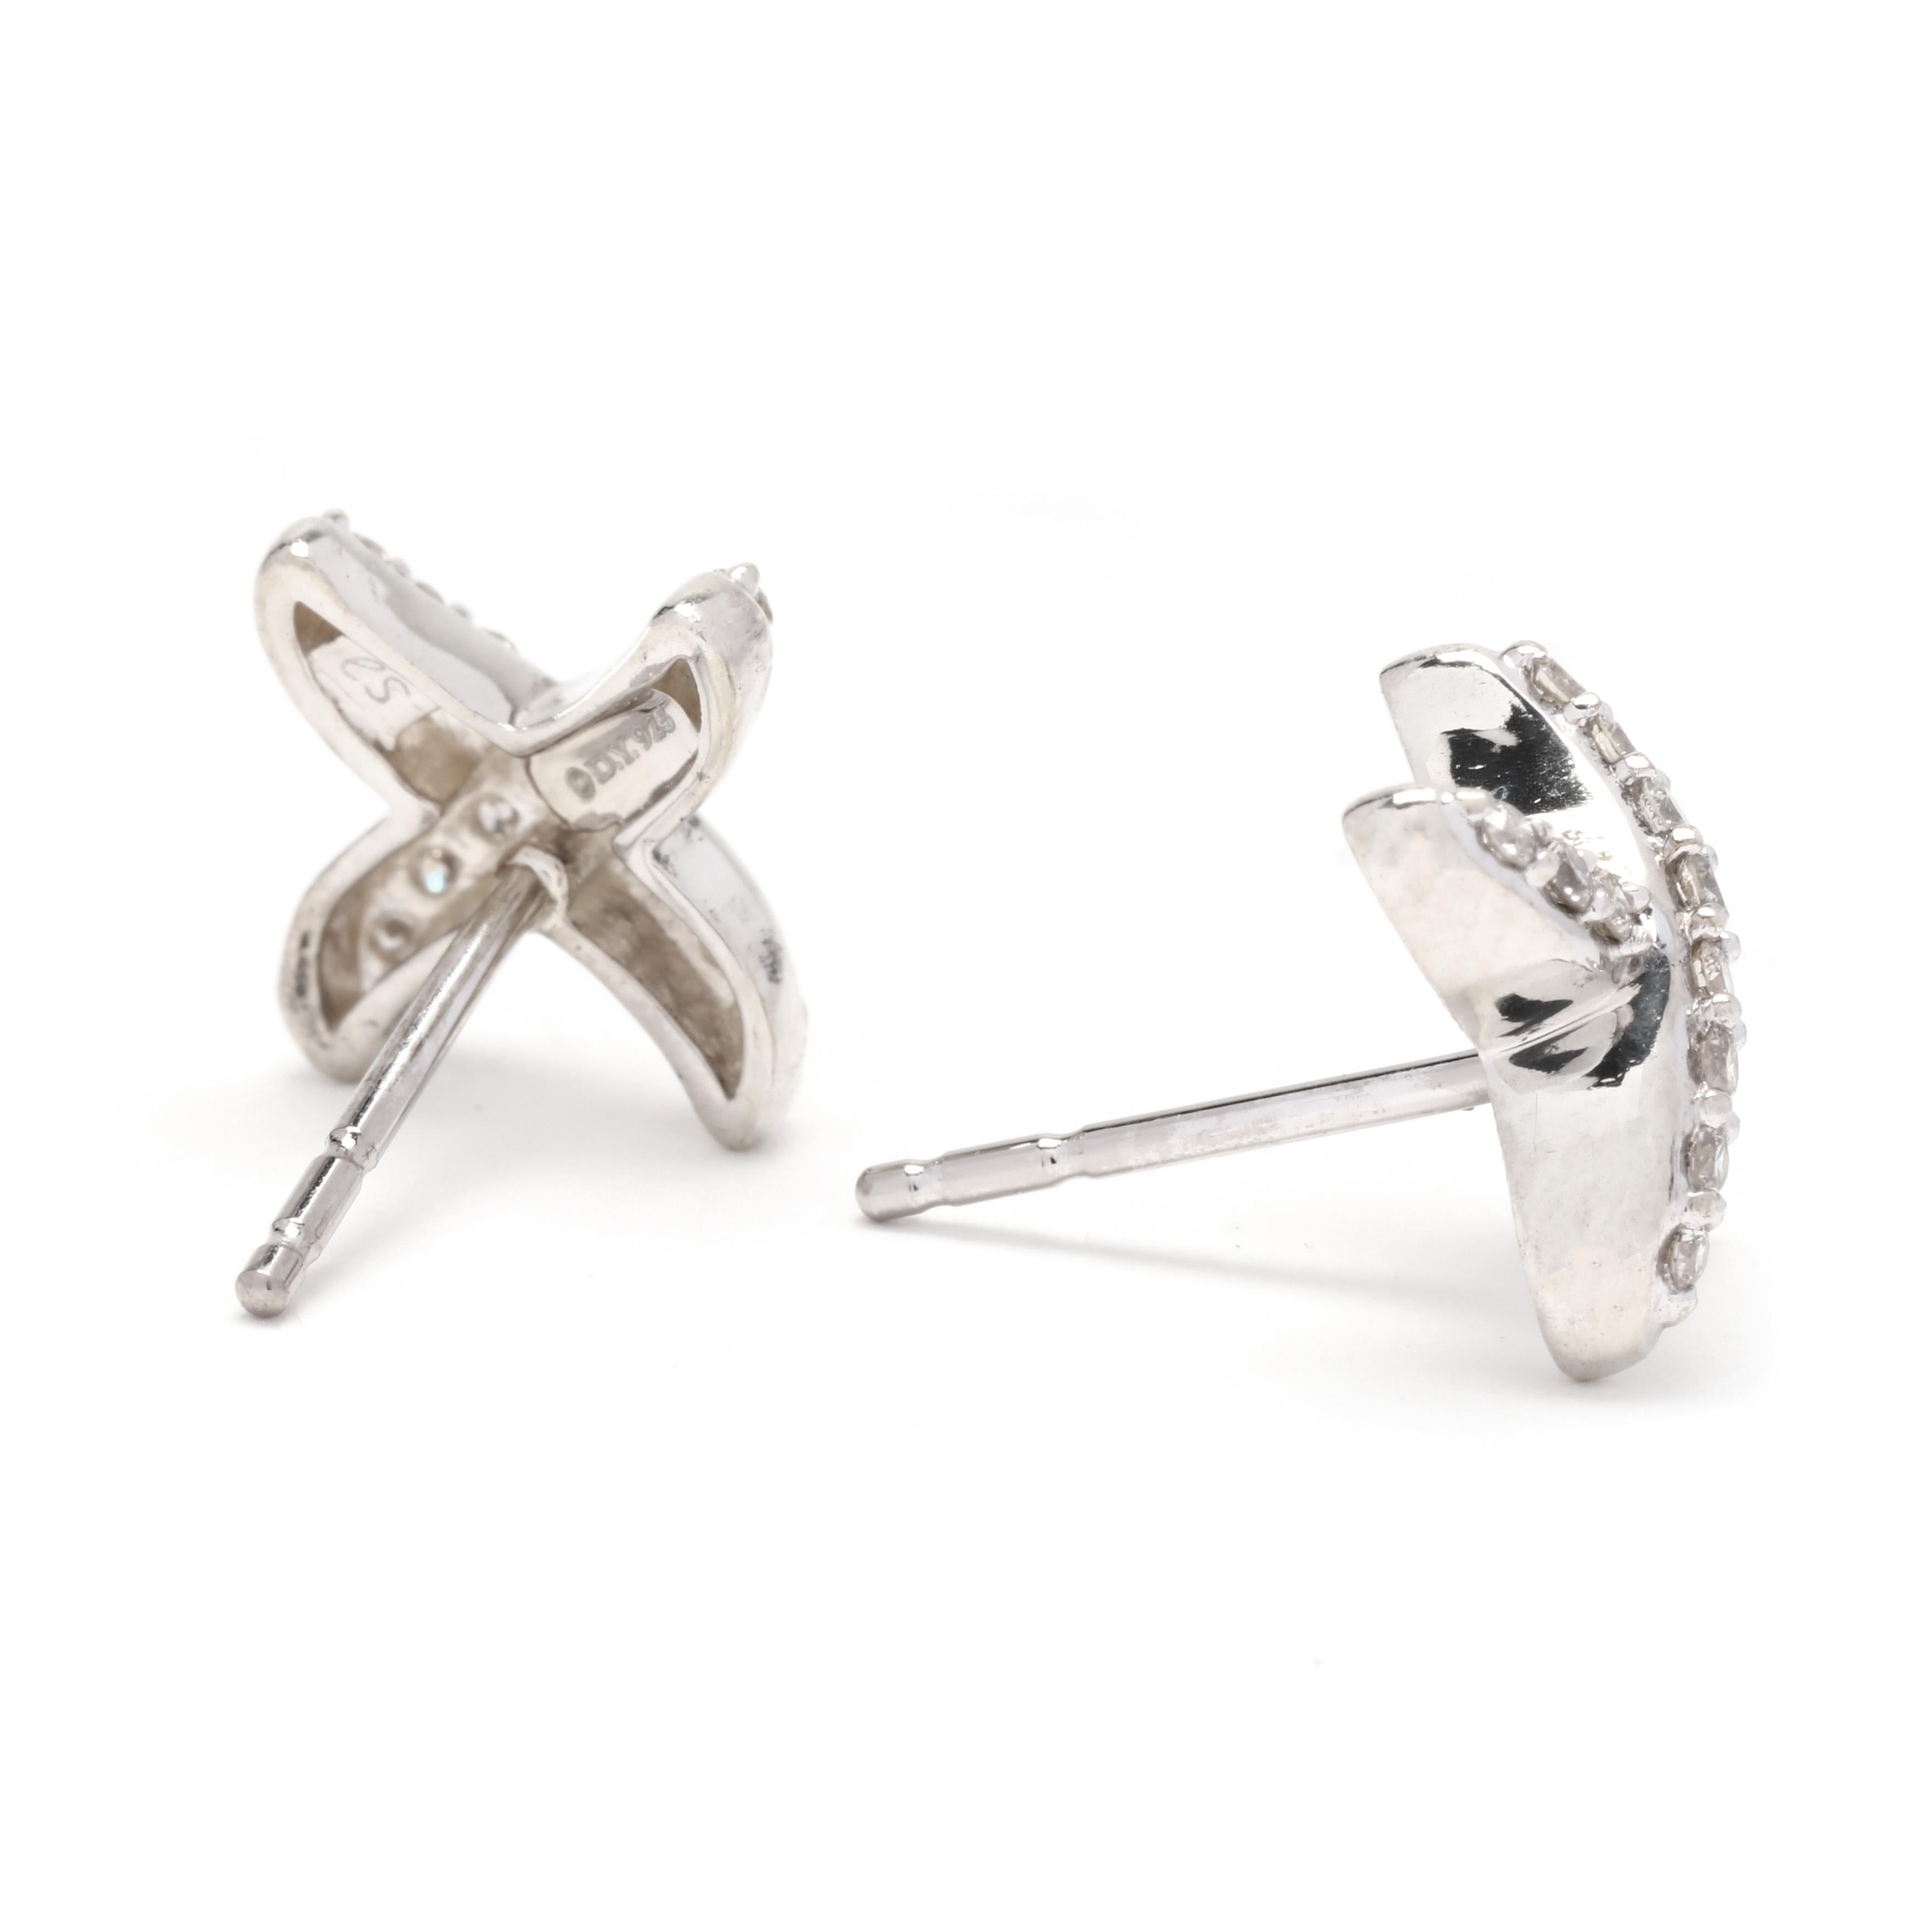 These classic and sophisticated David Yurman .25ctw diamond X stud earrings in sterling silver are the perfect addition to your jewelry collection. These stunning earrings feature a simple yet elegant X design set with .25 carat of sparkling